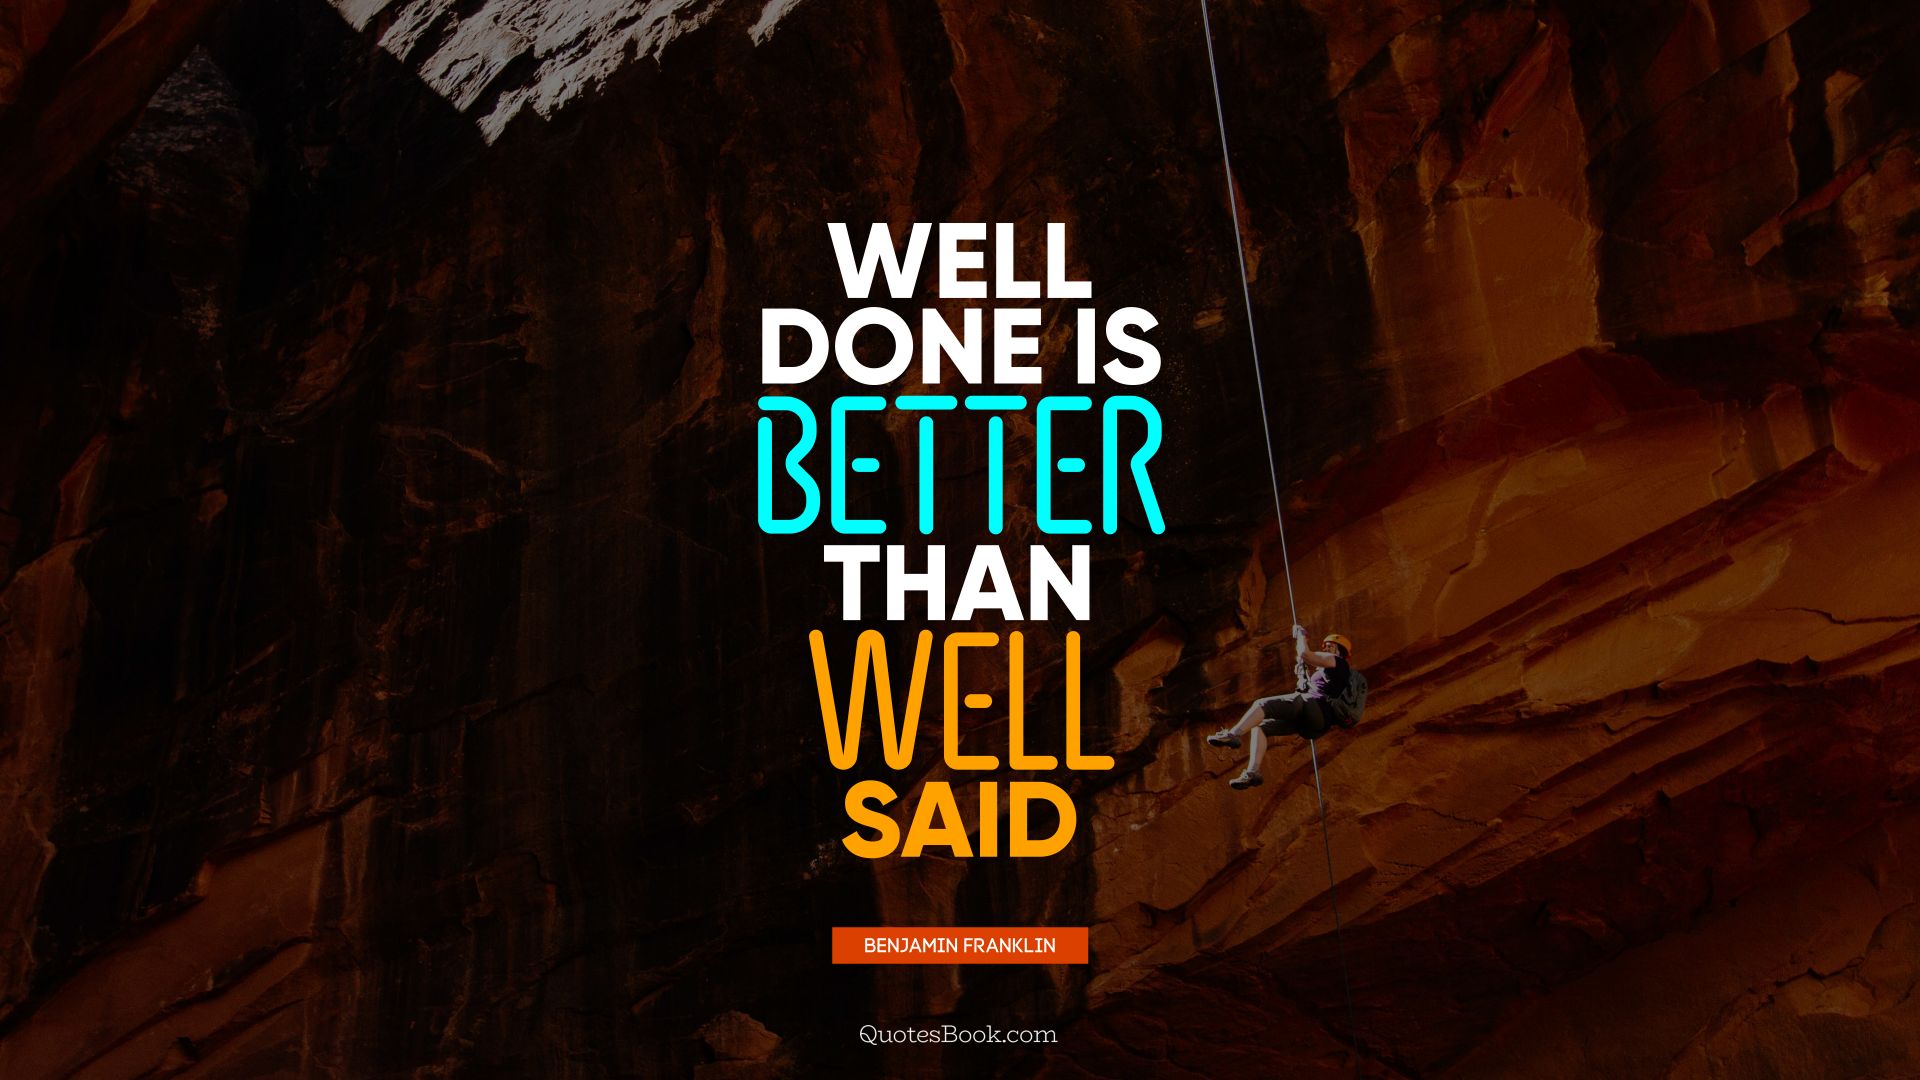 Well done is better than well said. - Quote by Benjamin Franklin